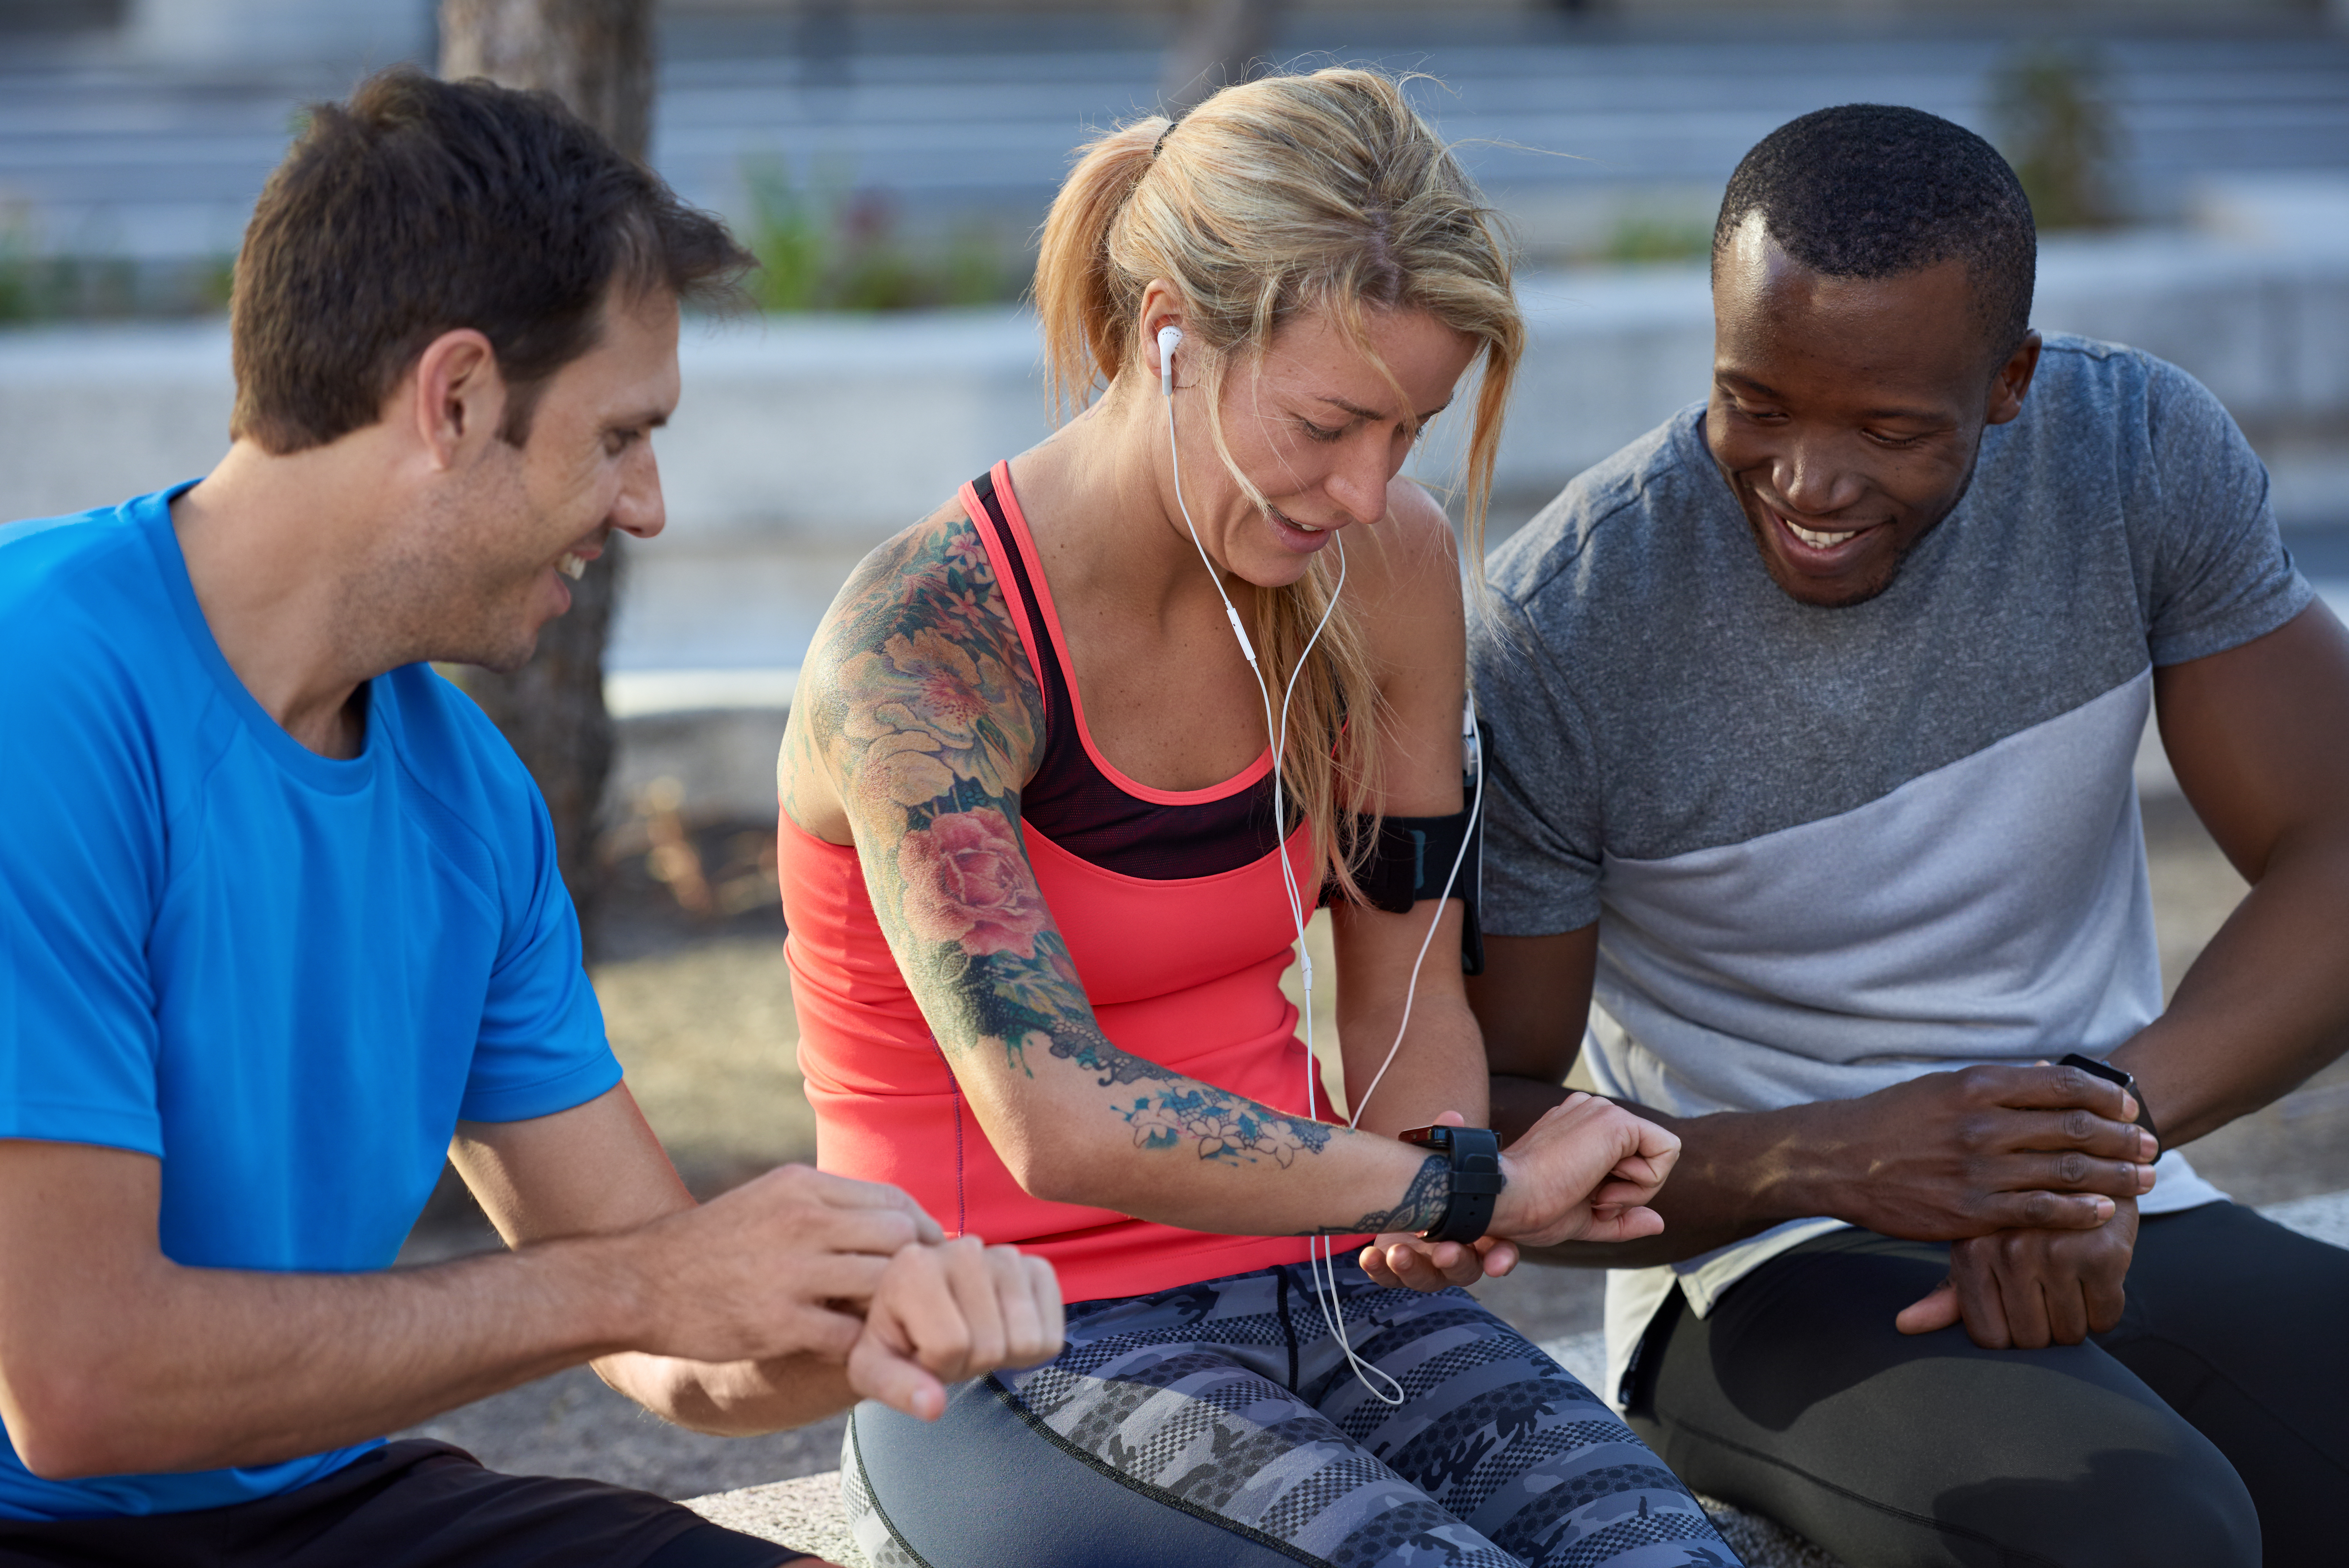 Two men and a woman sitting on a bench looking at their fitness trackers